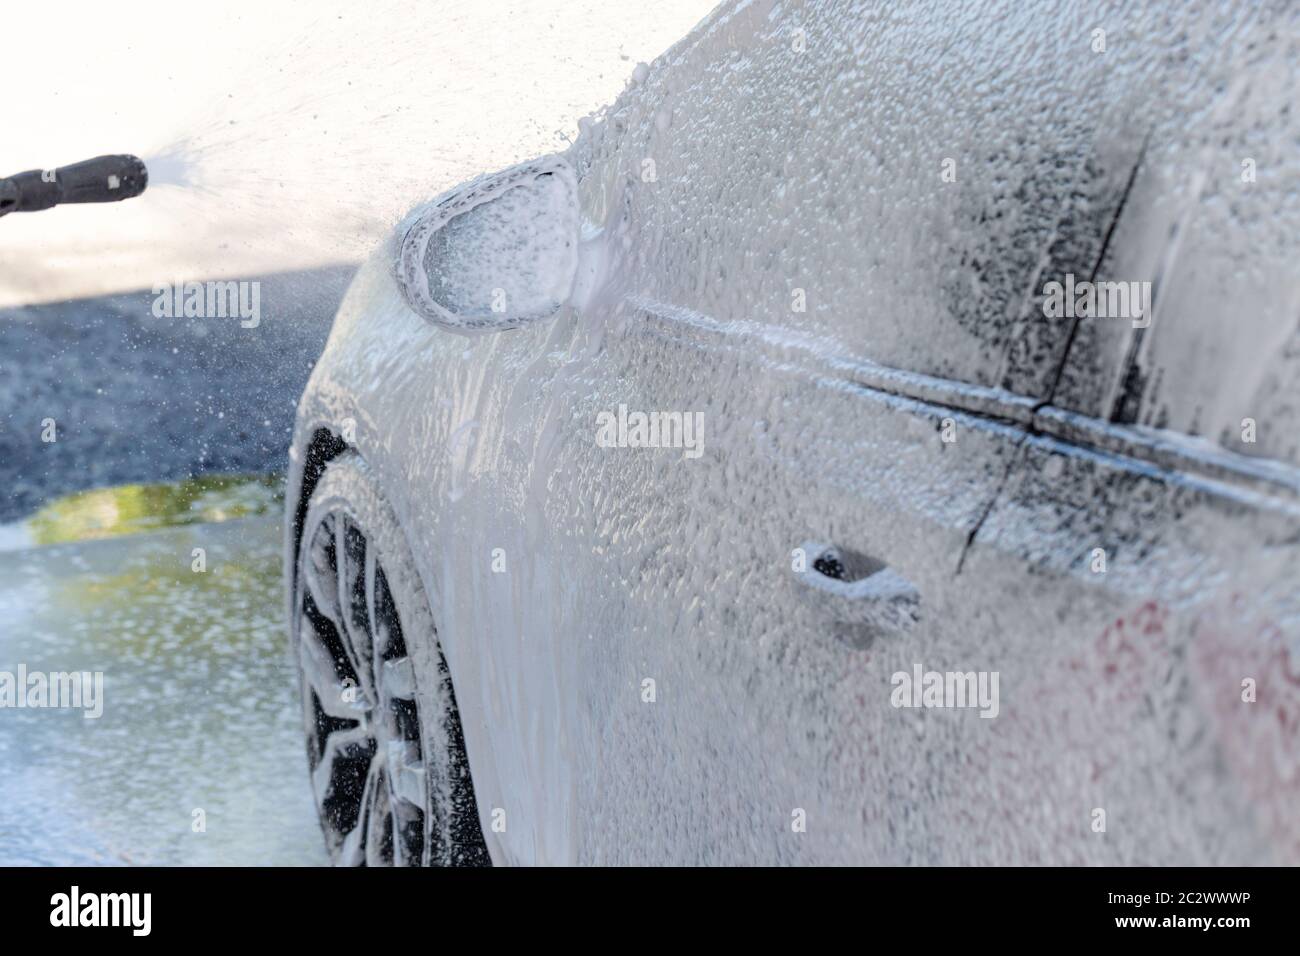 Closeup of manual car washing, cleaning with foam, pressured water. Self-service car wash with high-pressure hose Stock Photo